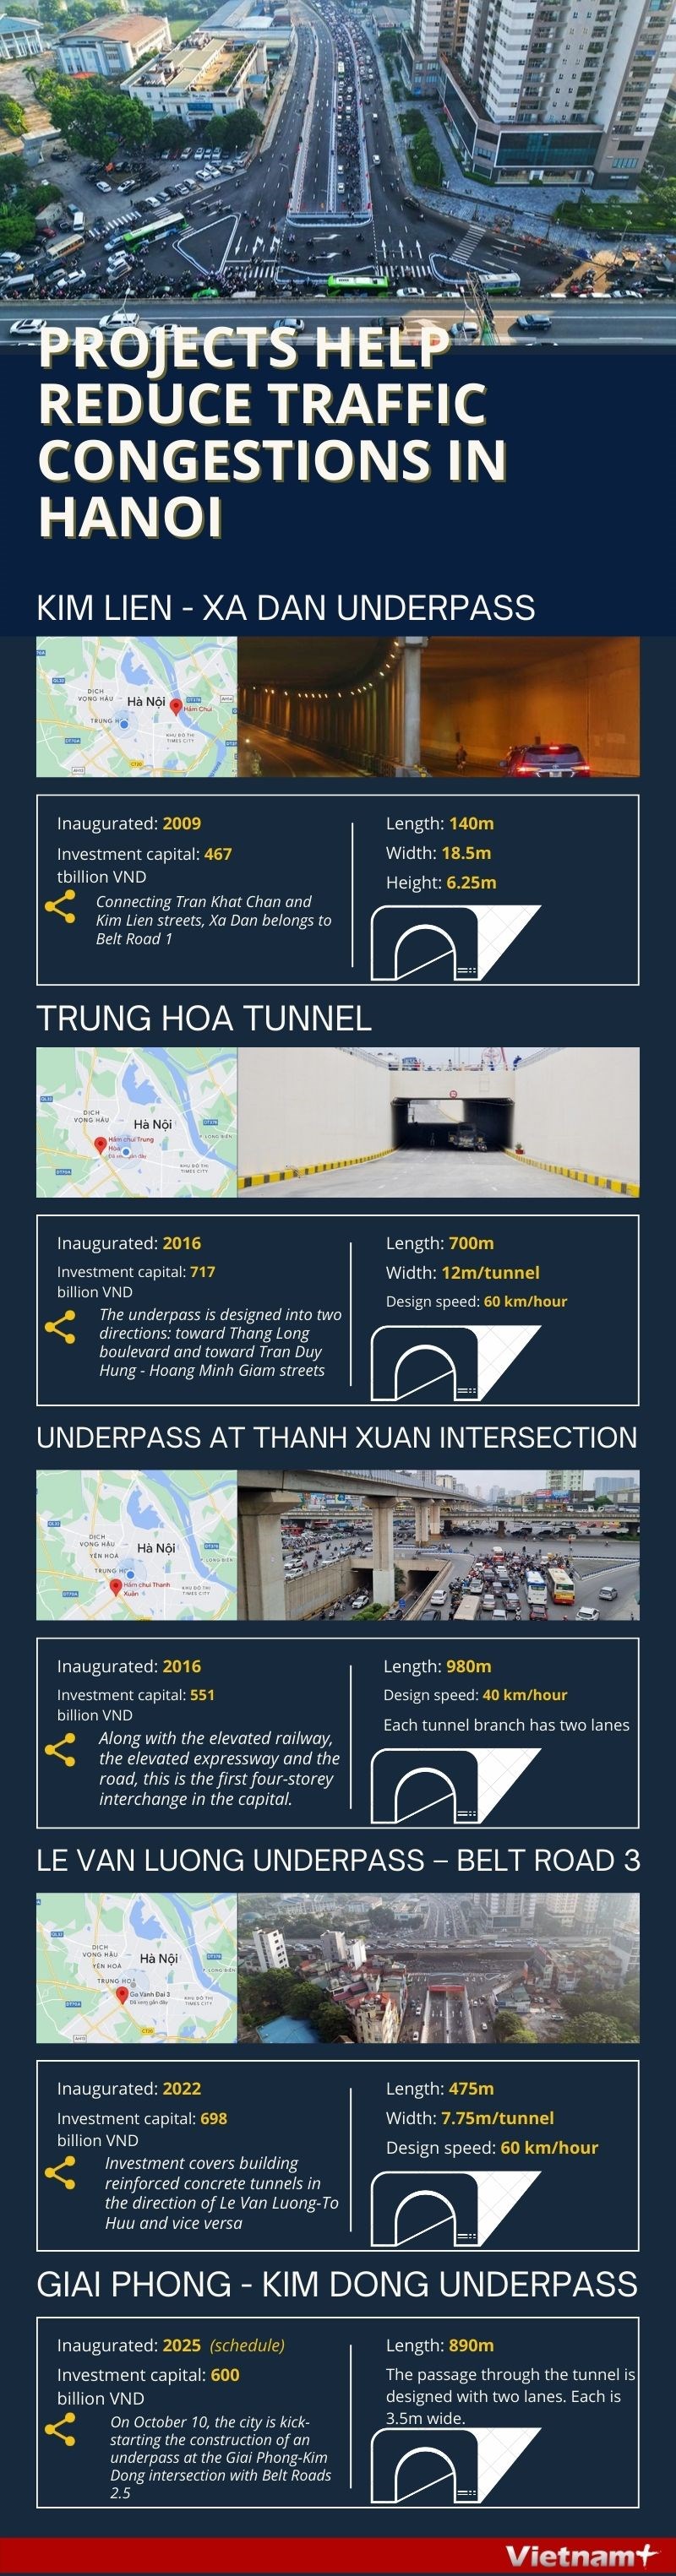 Projects help reduce traffic congestions in Hanoi hinh anh 1